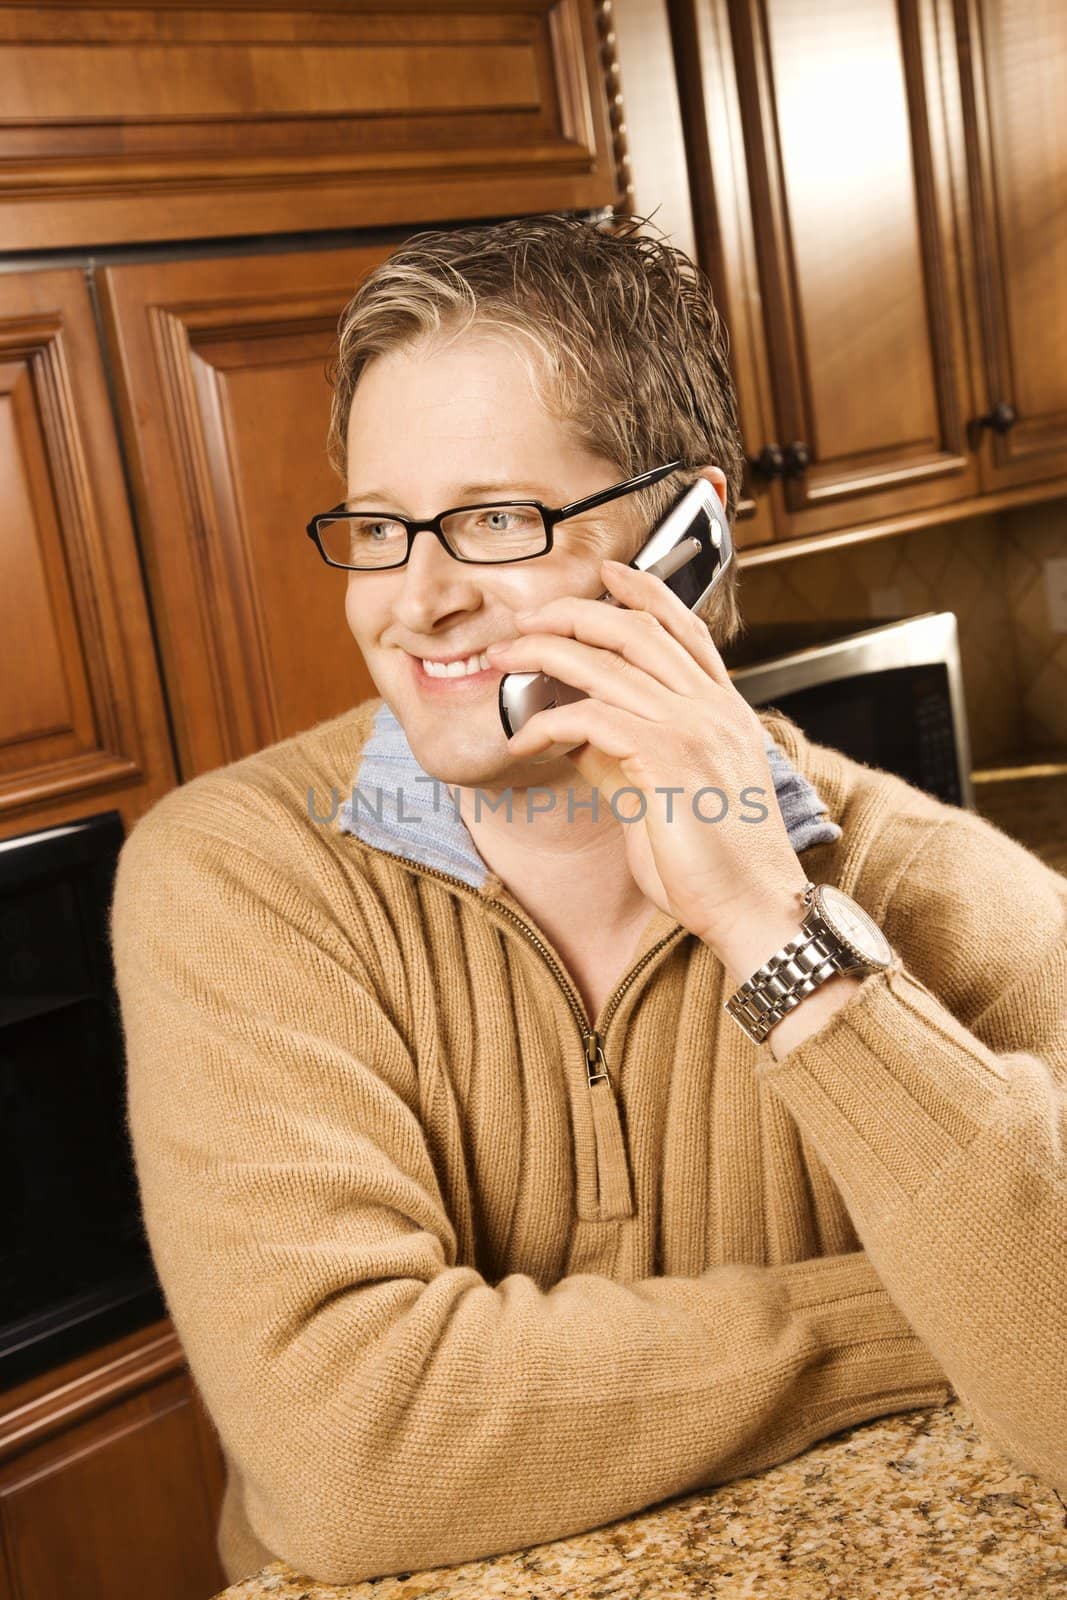 Caucasian man smiling and talking on cellphone while leaning on kitchen counter.